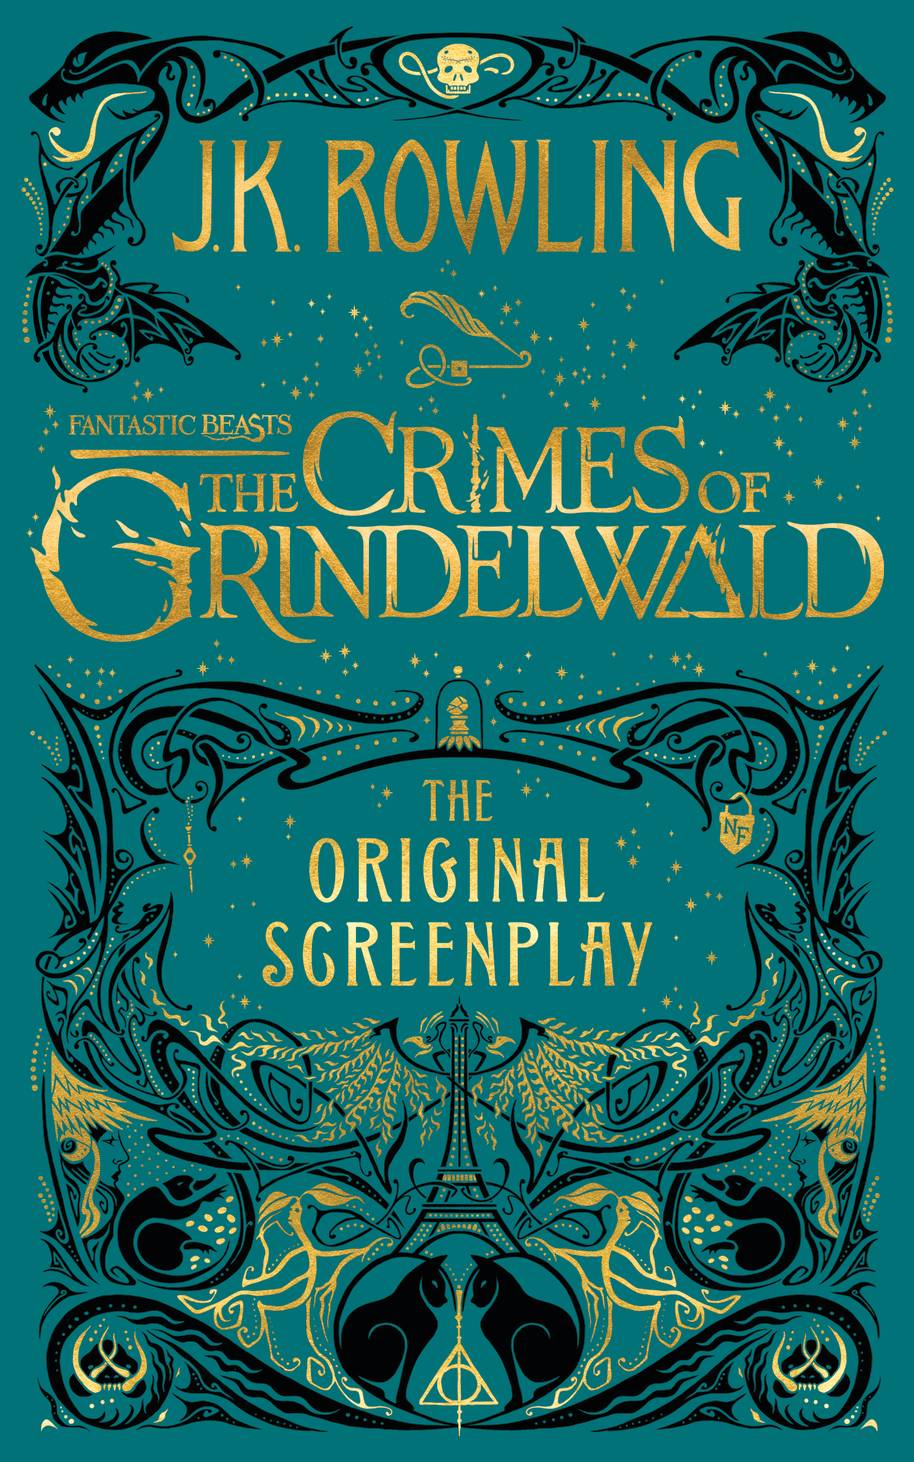 The screenplay for Fantastic Beasts: The Crimes of Grindelwald.